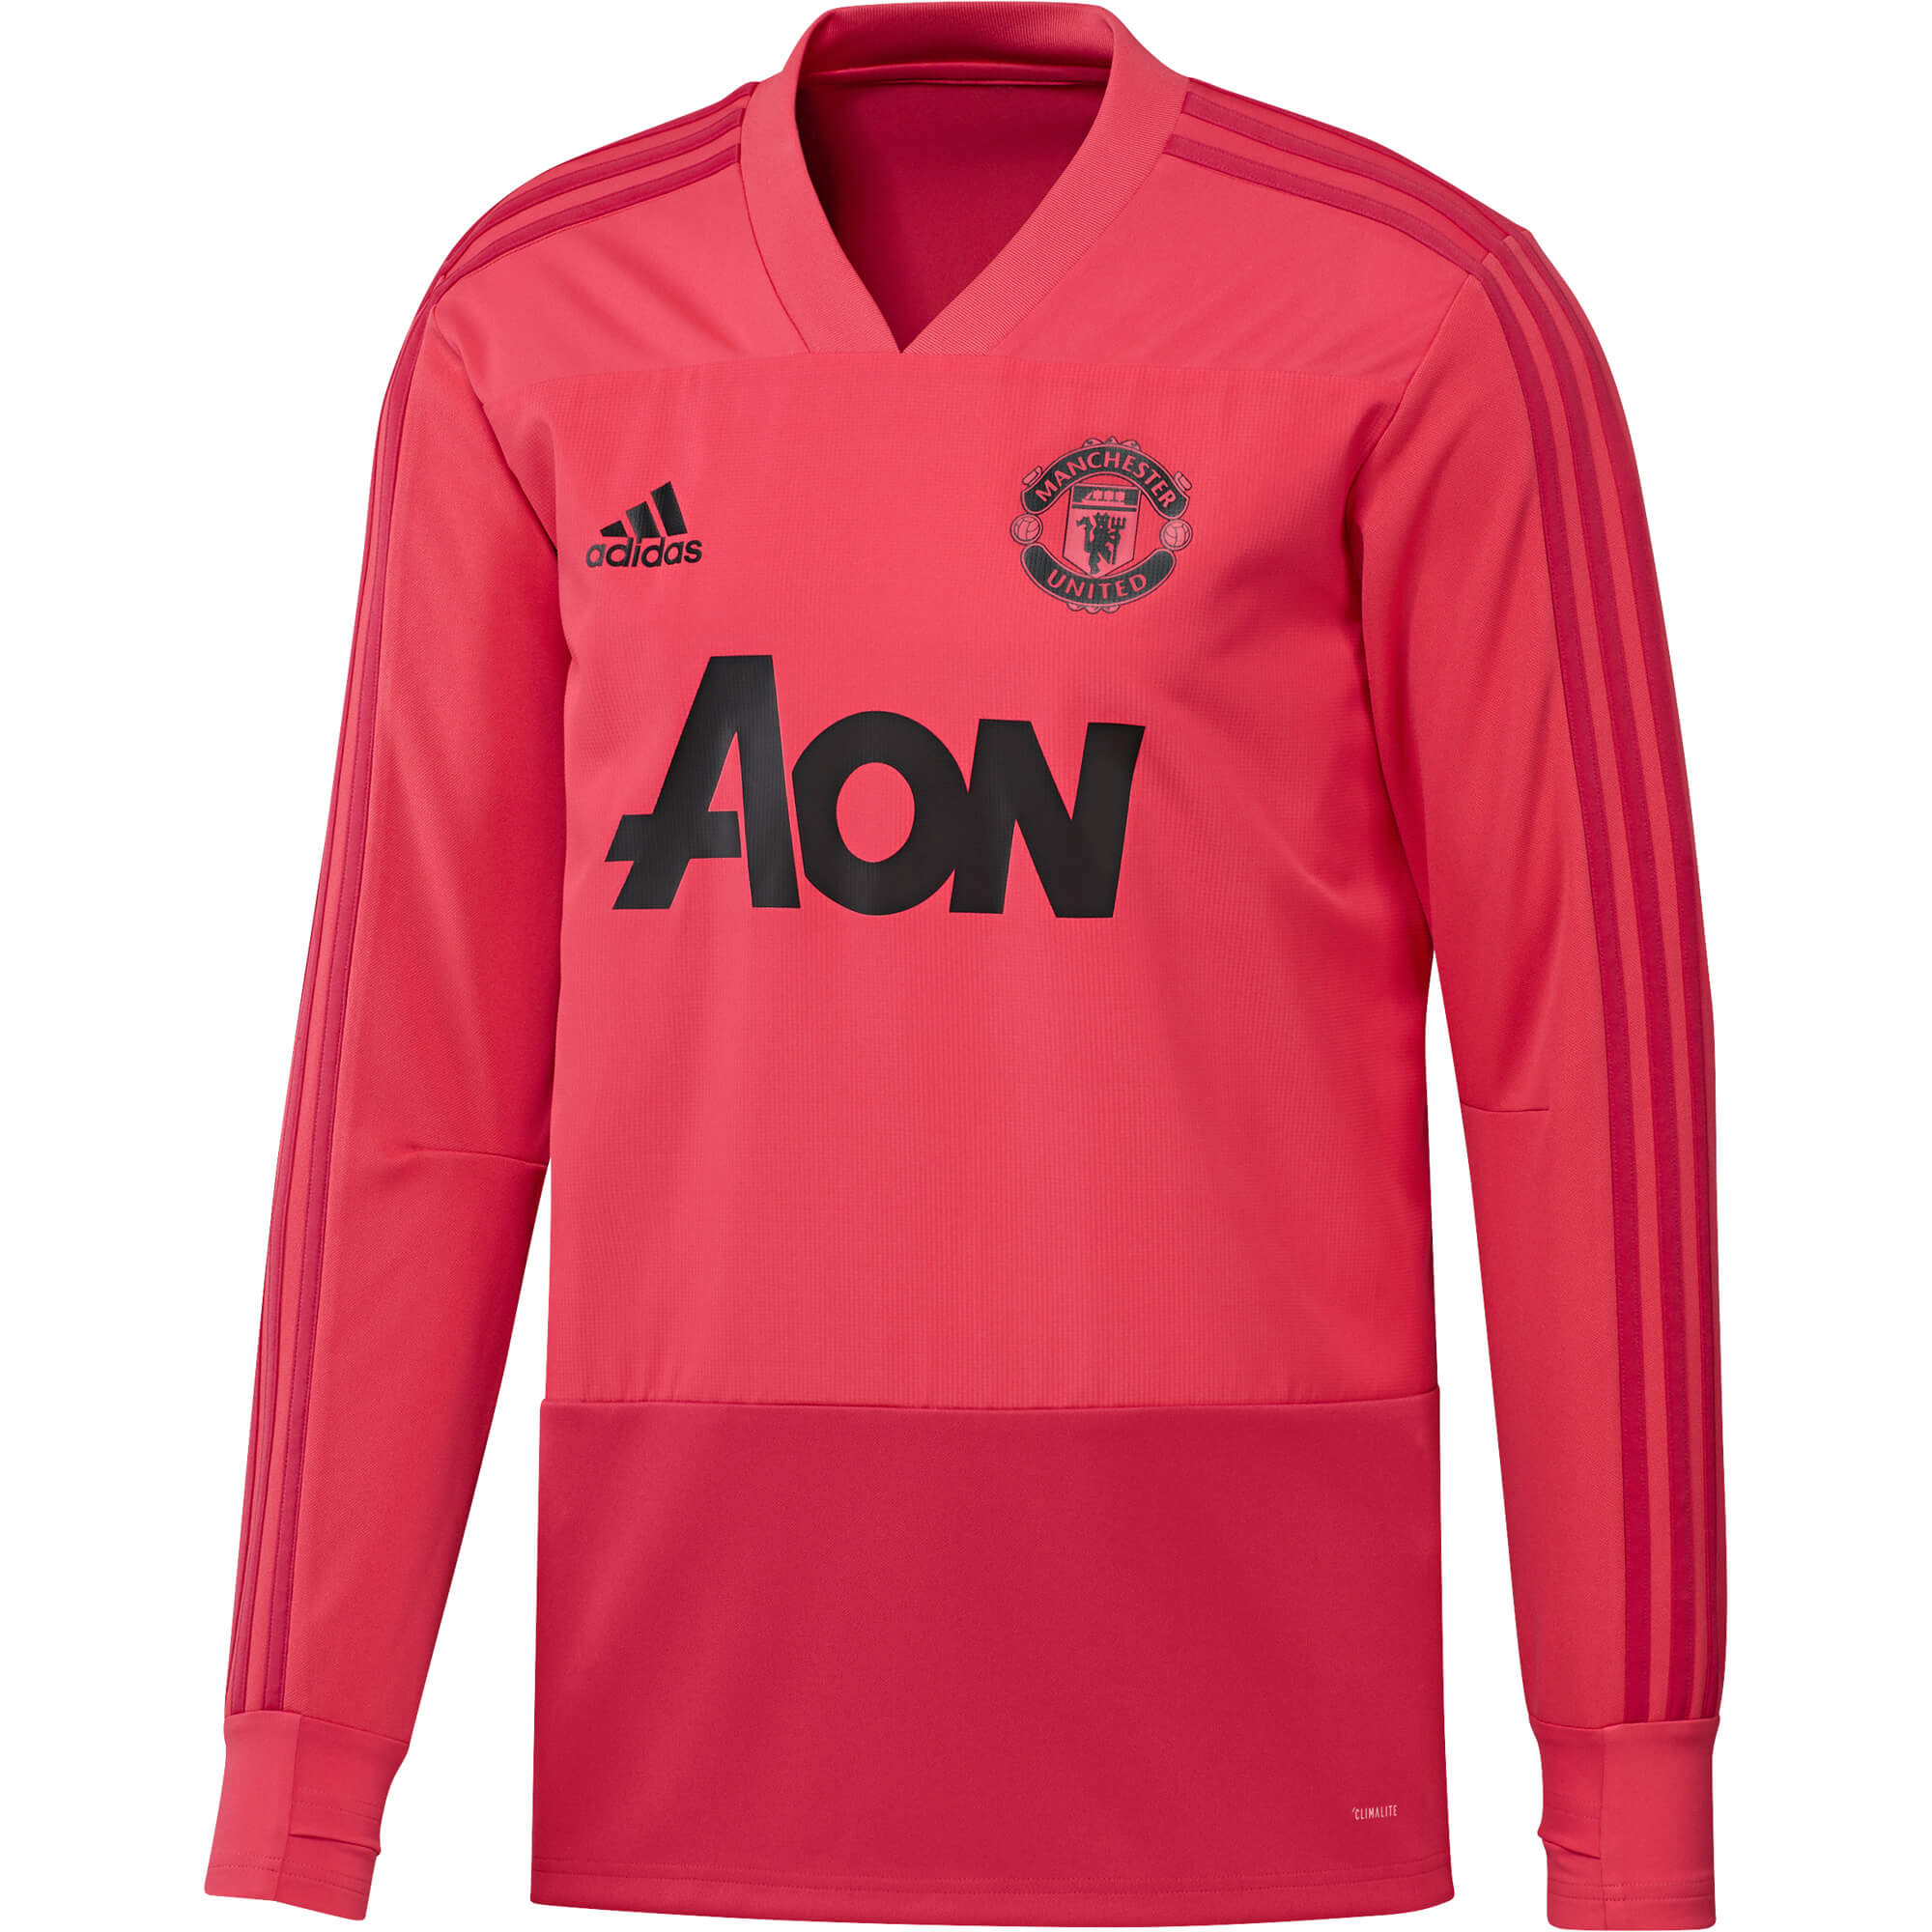 ADIDAS MANCHESTER UNITED TRG TOP ROSE 2018/2019